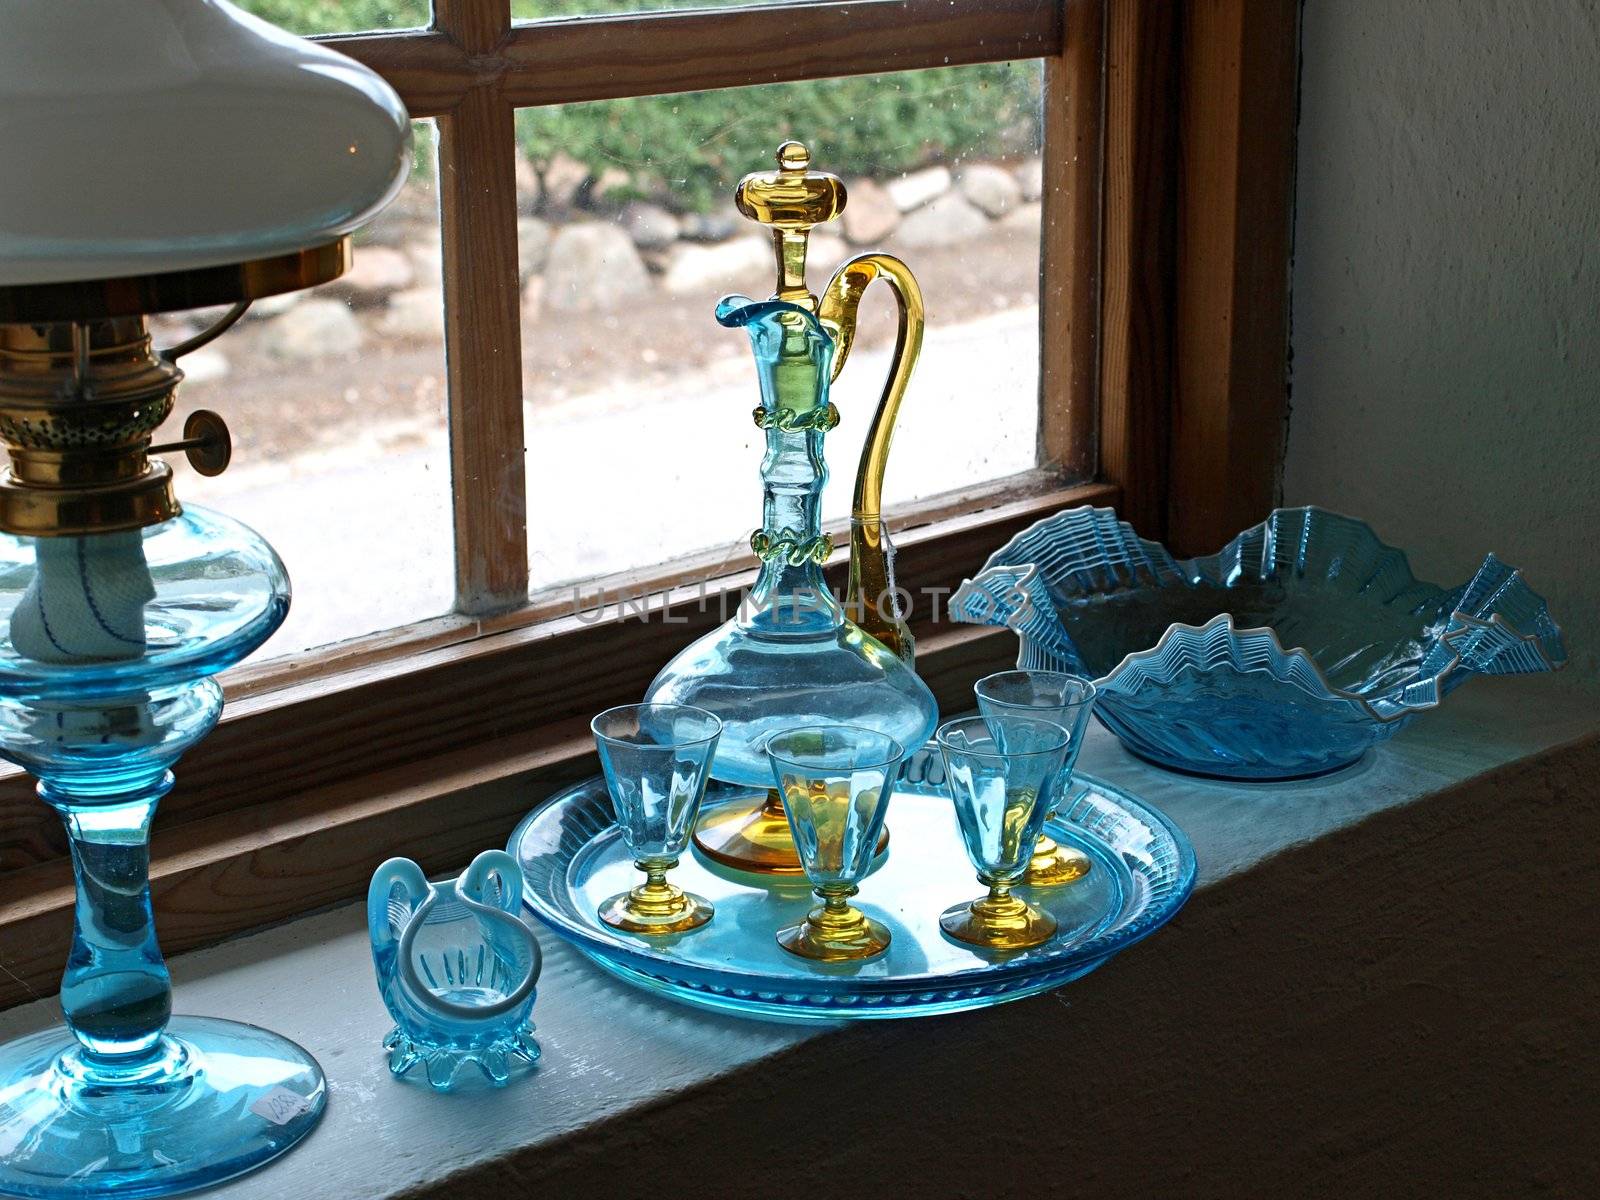 Beautiful decorative old glass items display by the window       